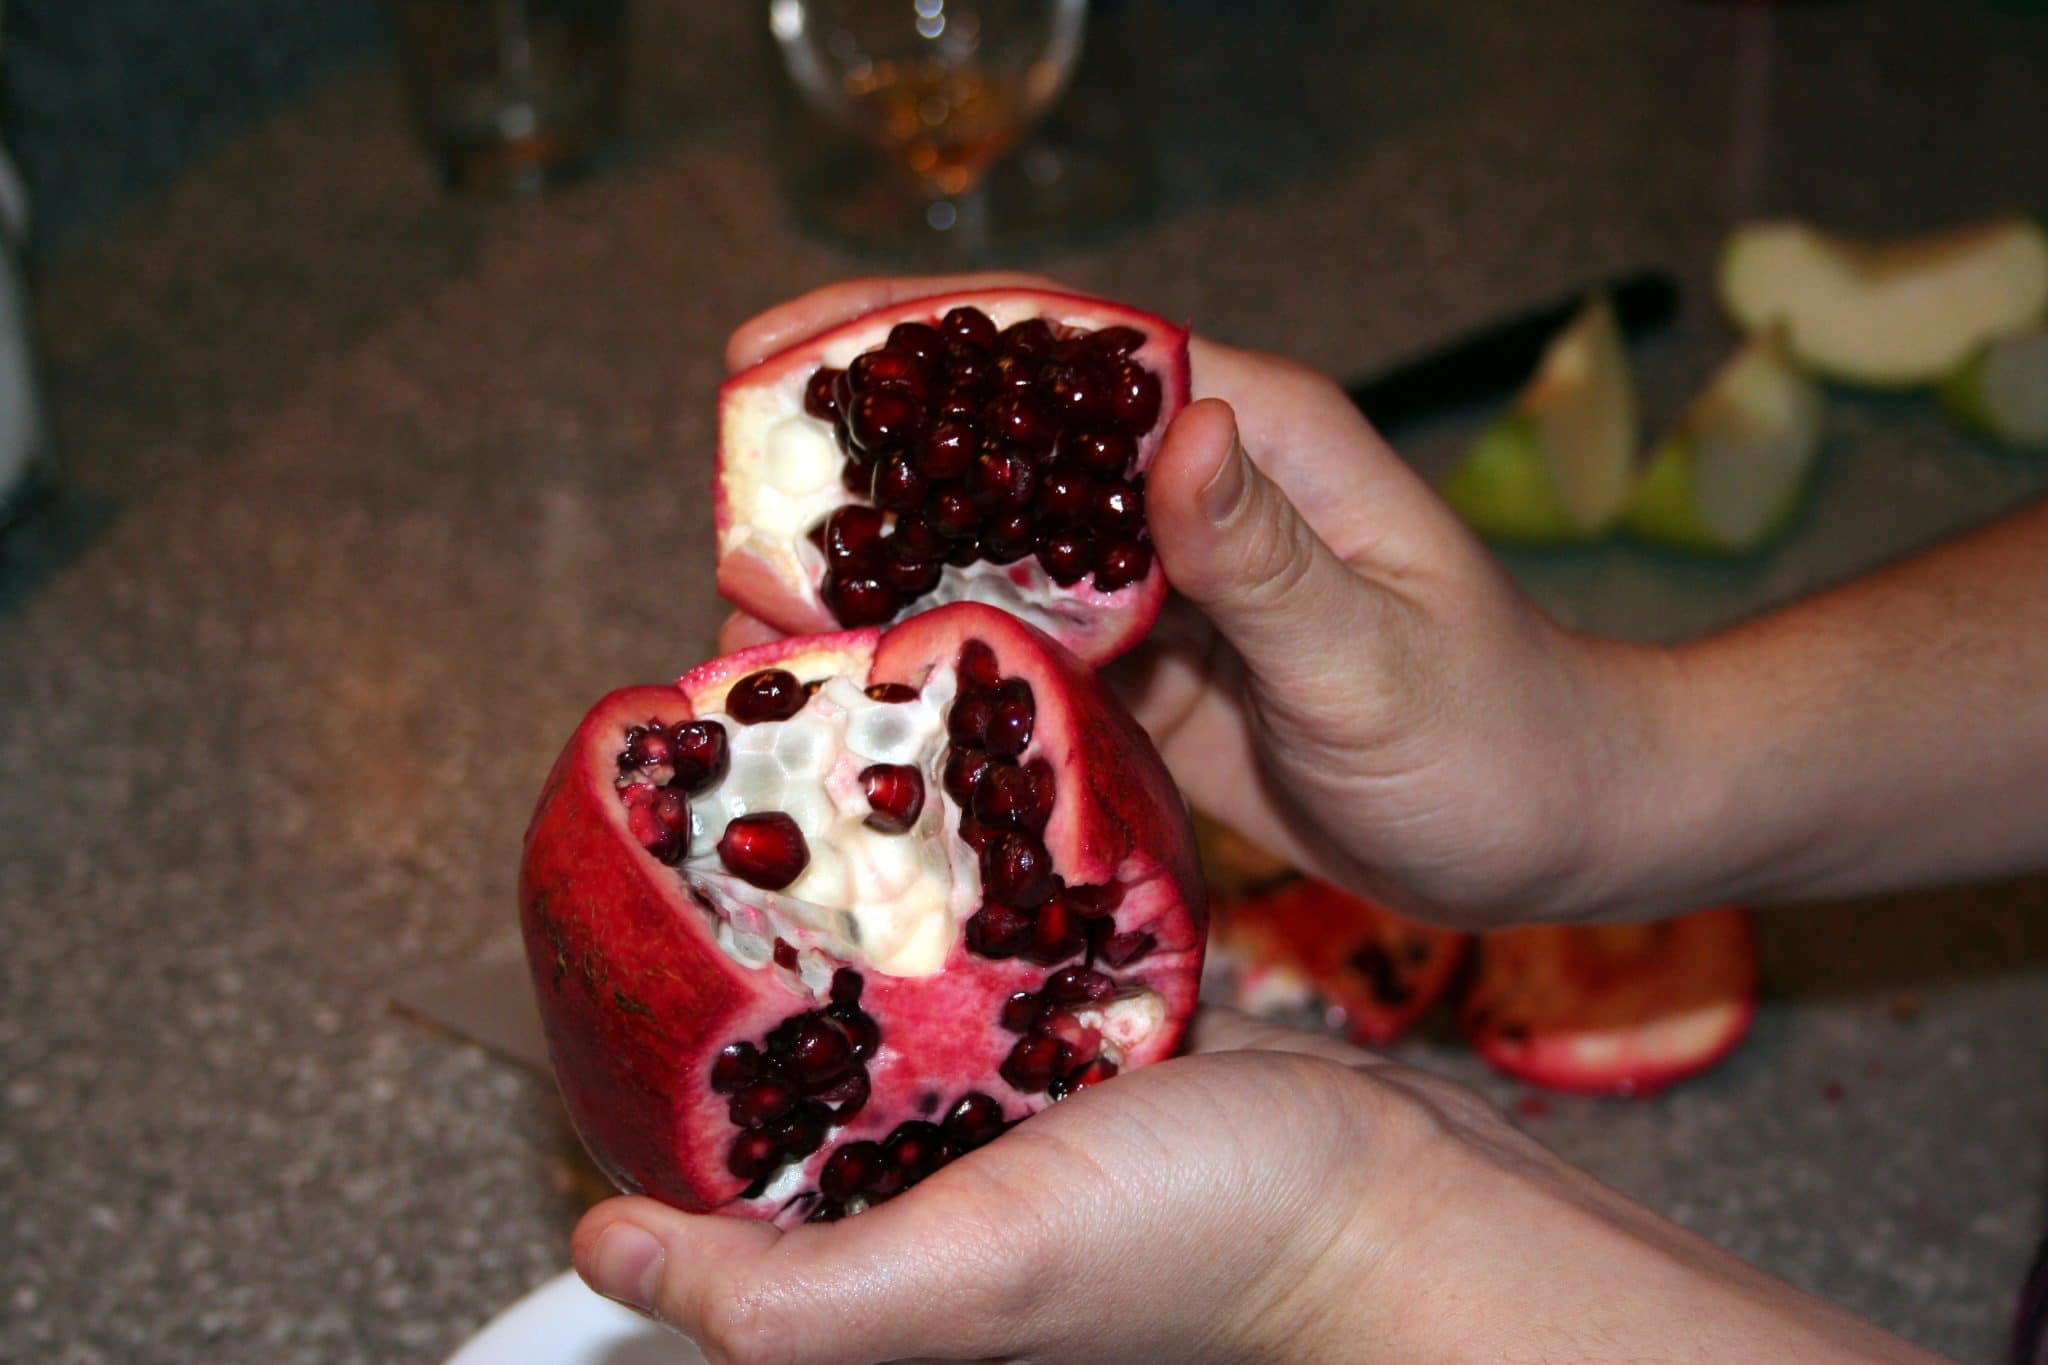 Pomegranate cut in half to show seeds